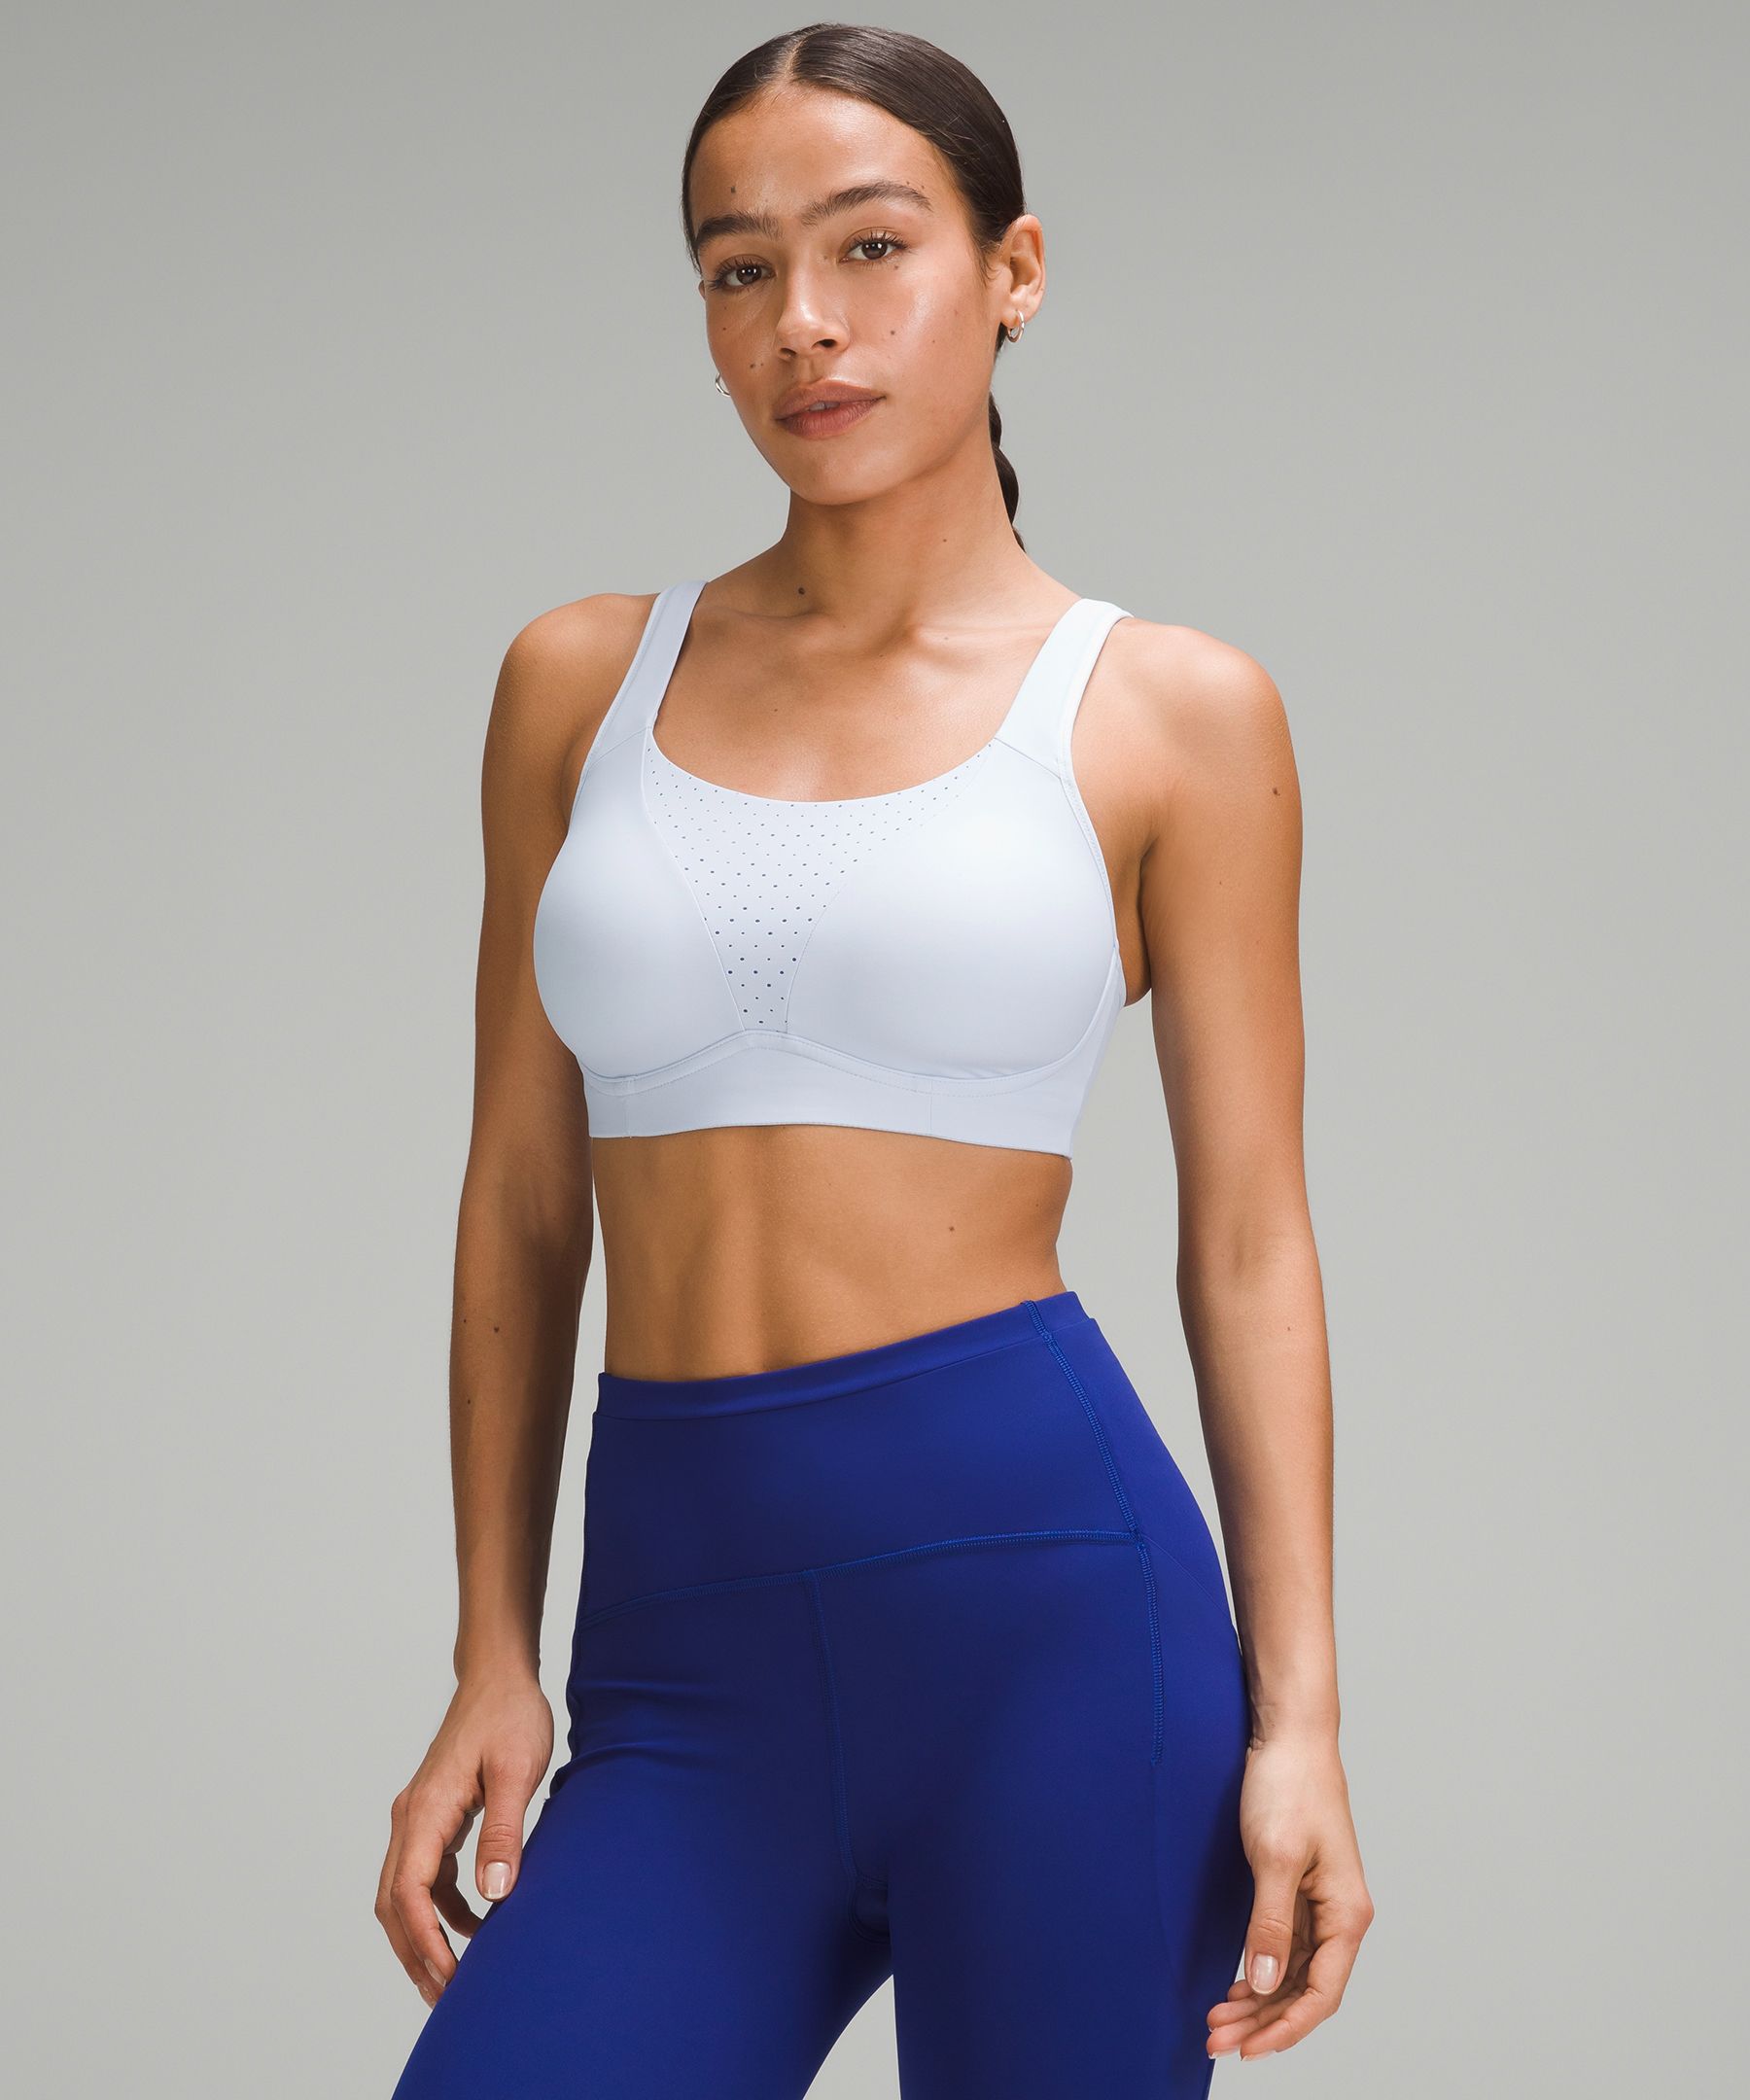 Lululemon Run Times High Support Bra Size undefined - $41 - From